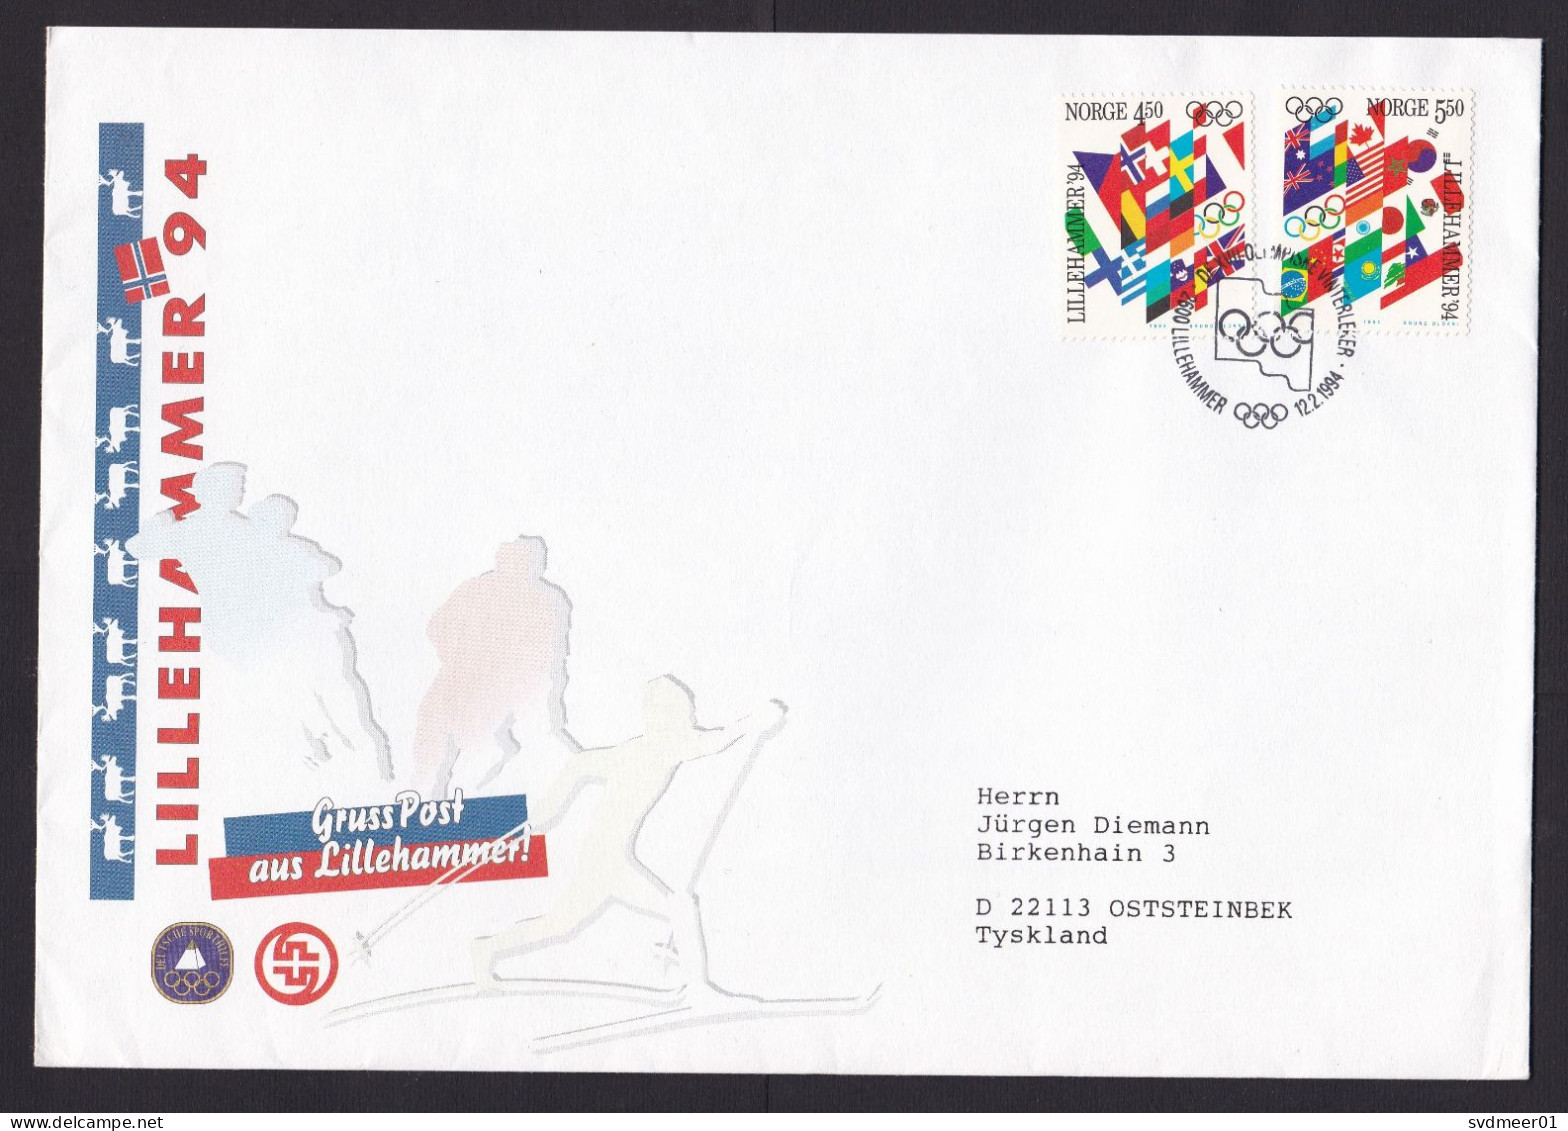 Norway: Cover To Gerrmany, 1994, 2 Stamps, Olympics Lillehammer, Picture Cards German Sporters Enclosed (traces Of Use) - Briefe U. Dokumente